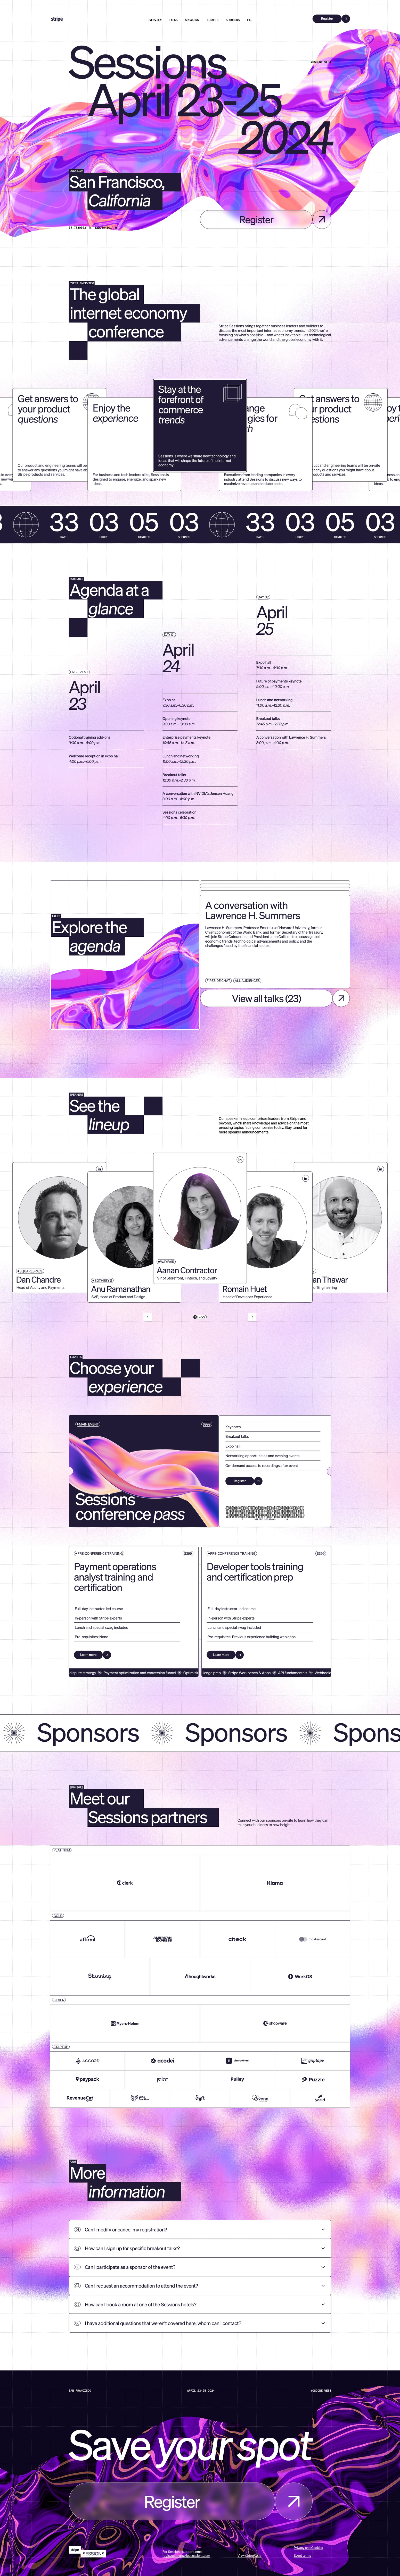 Stripe Sessions 2024 Landing Page Example: Stripe Sessions is a 2.5-day, in-person event with discussions about Stripe product updates, important internet economy trends, the future of payments and more.